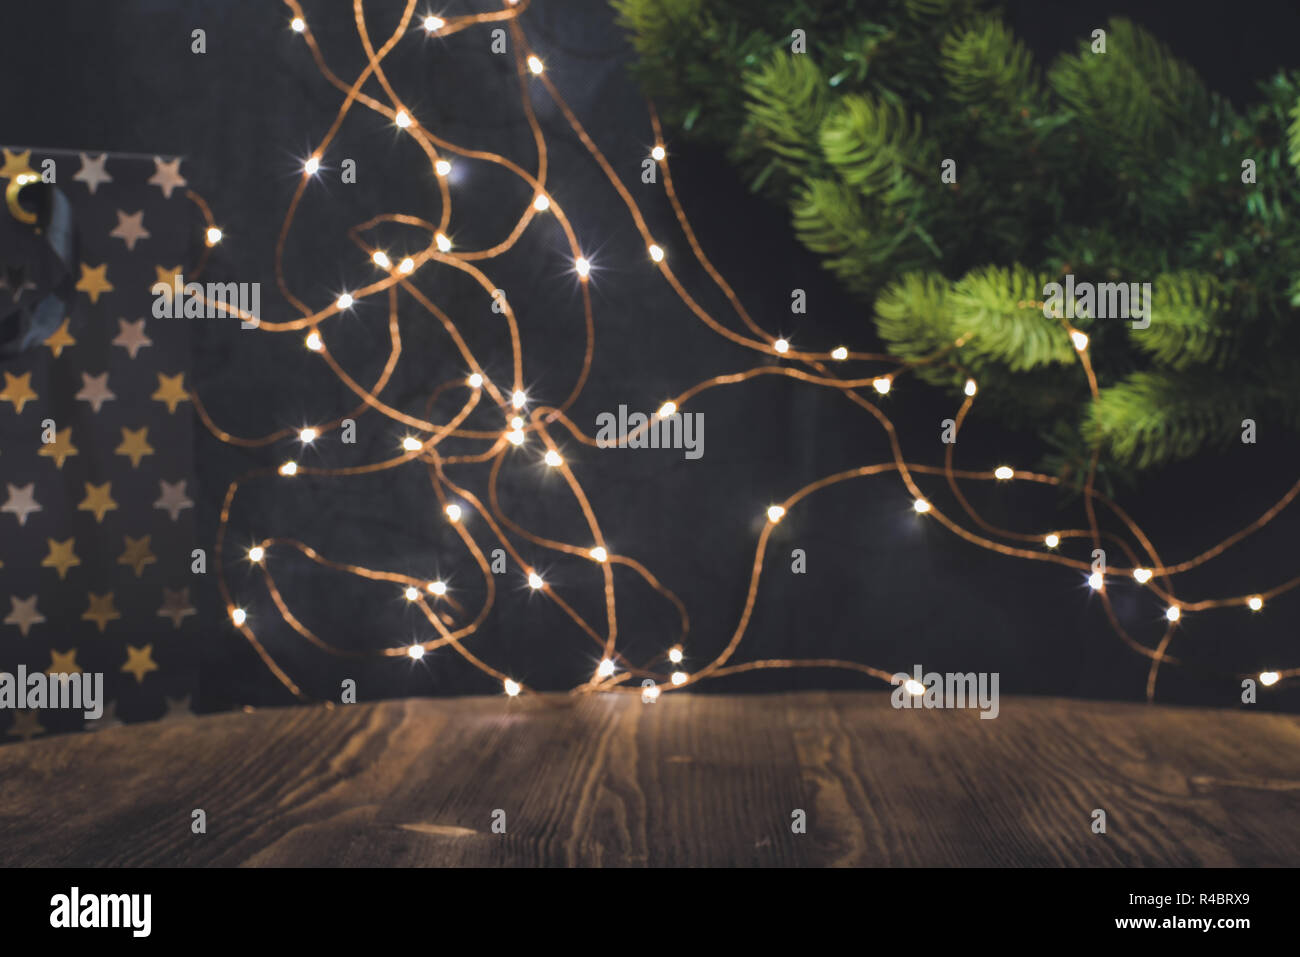 Smooth shady christmas and new year decoration background with star shaped lights Stock Photo